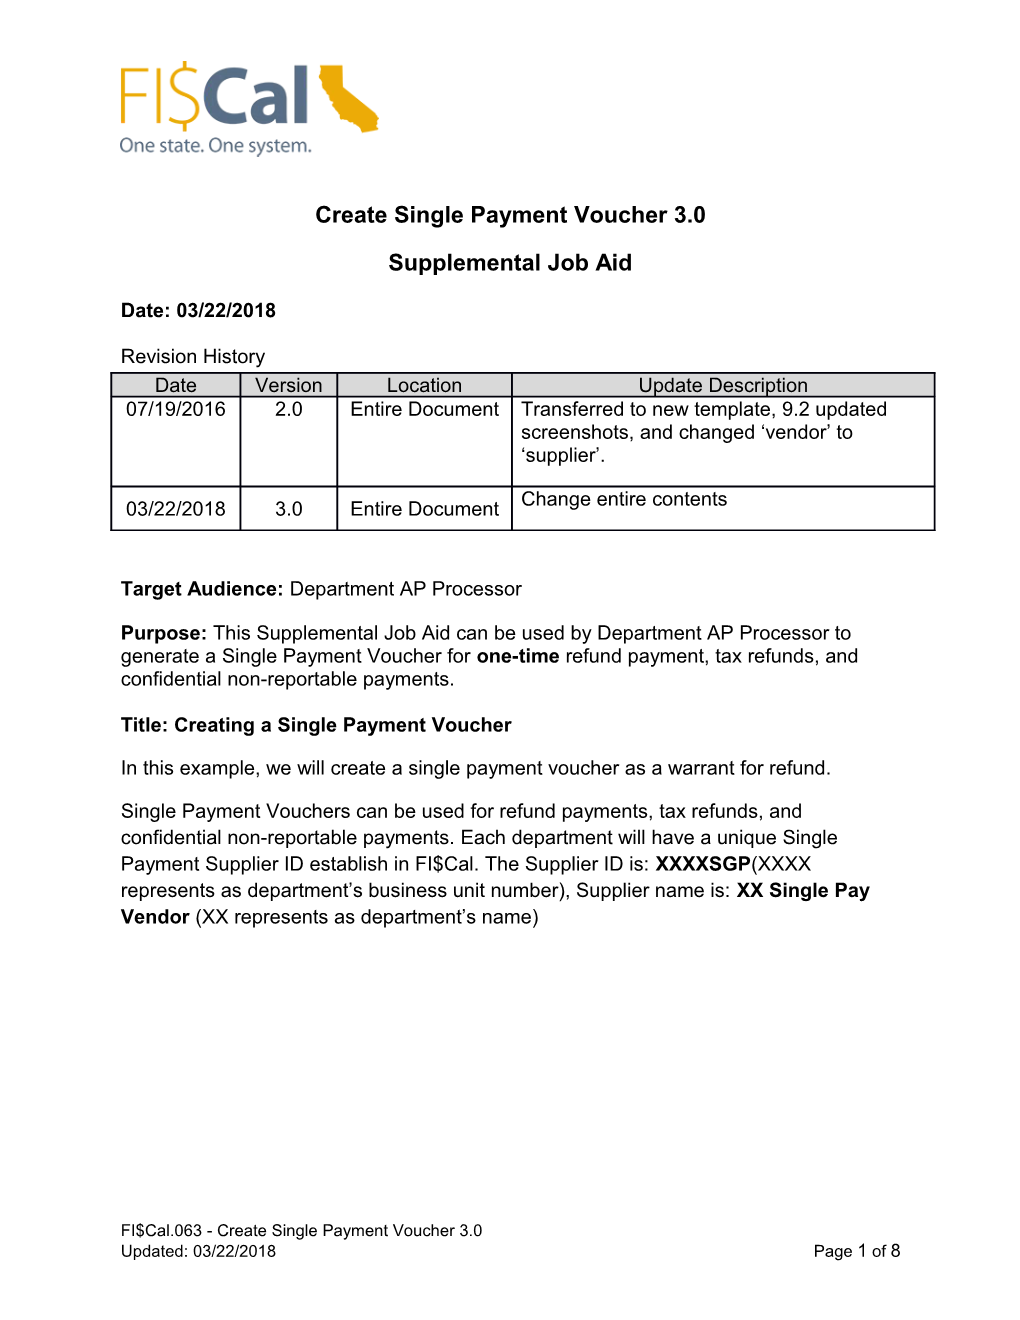 Fiscal.063-Create Single Pymt Voucher for Agency Trust Refunds 3.0